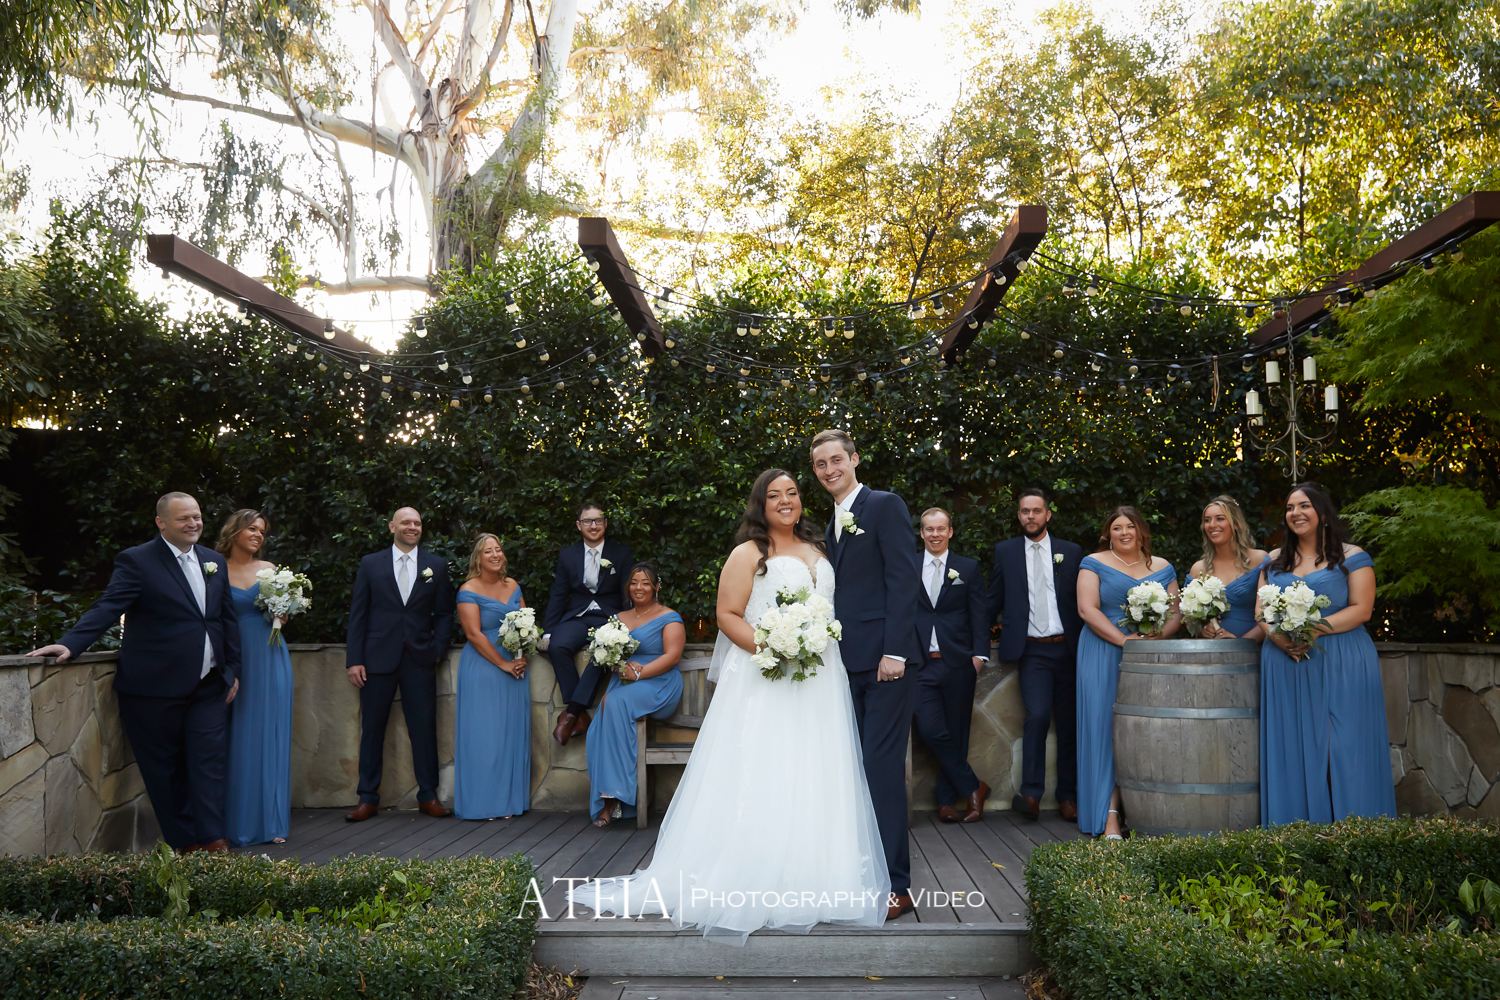 , Kathleen and Andrew&#8217;s wedding photography at Ballara Receptions captured by ATEIA Photography &#038; Video